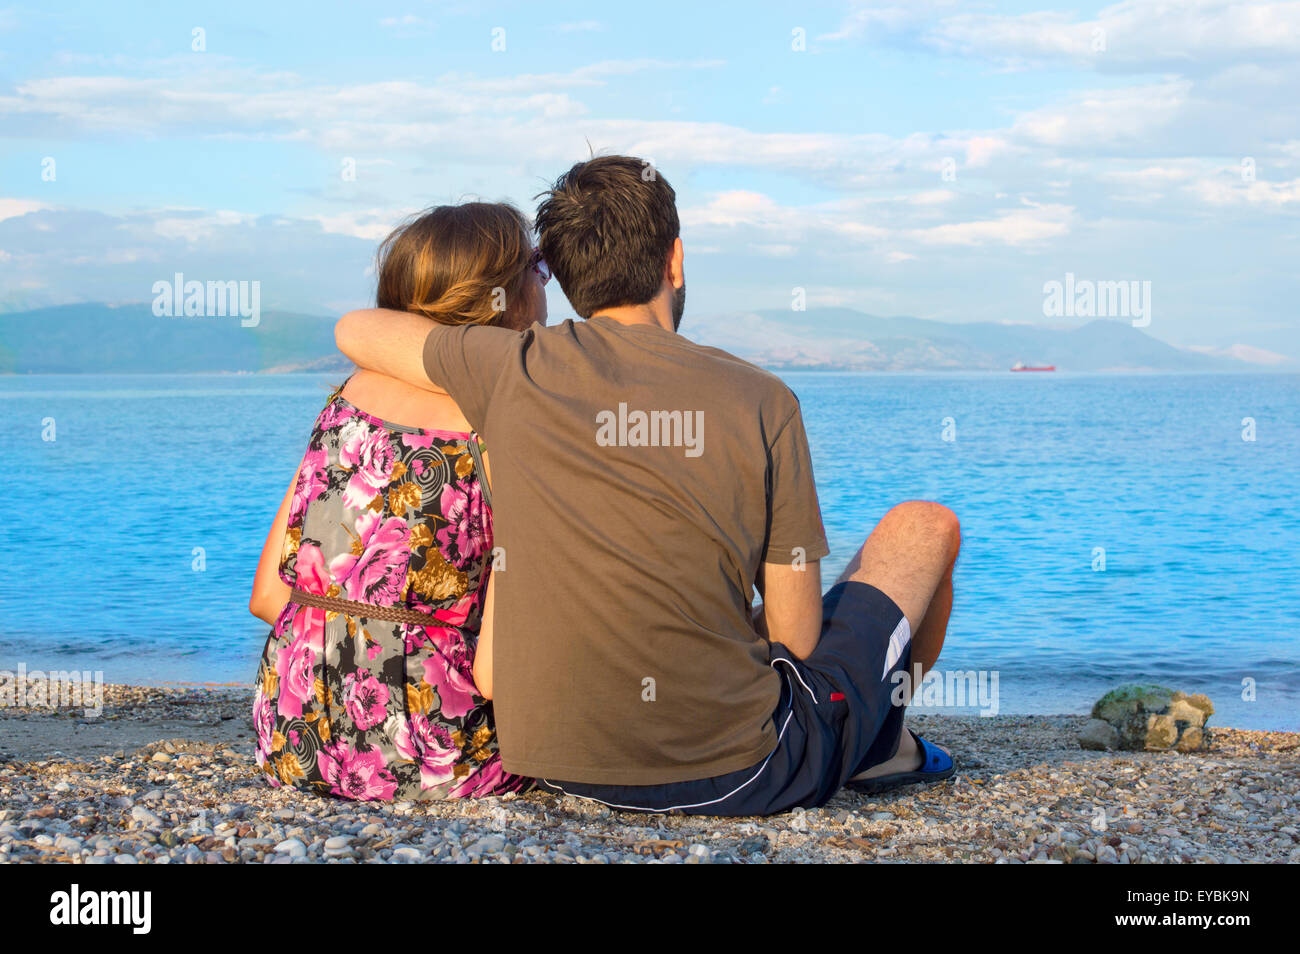 Young loving couple sitting together on a rocky beach and looking at the seaside Stock Photo